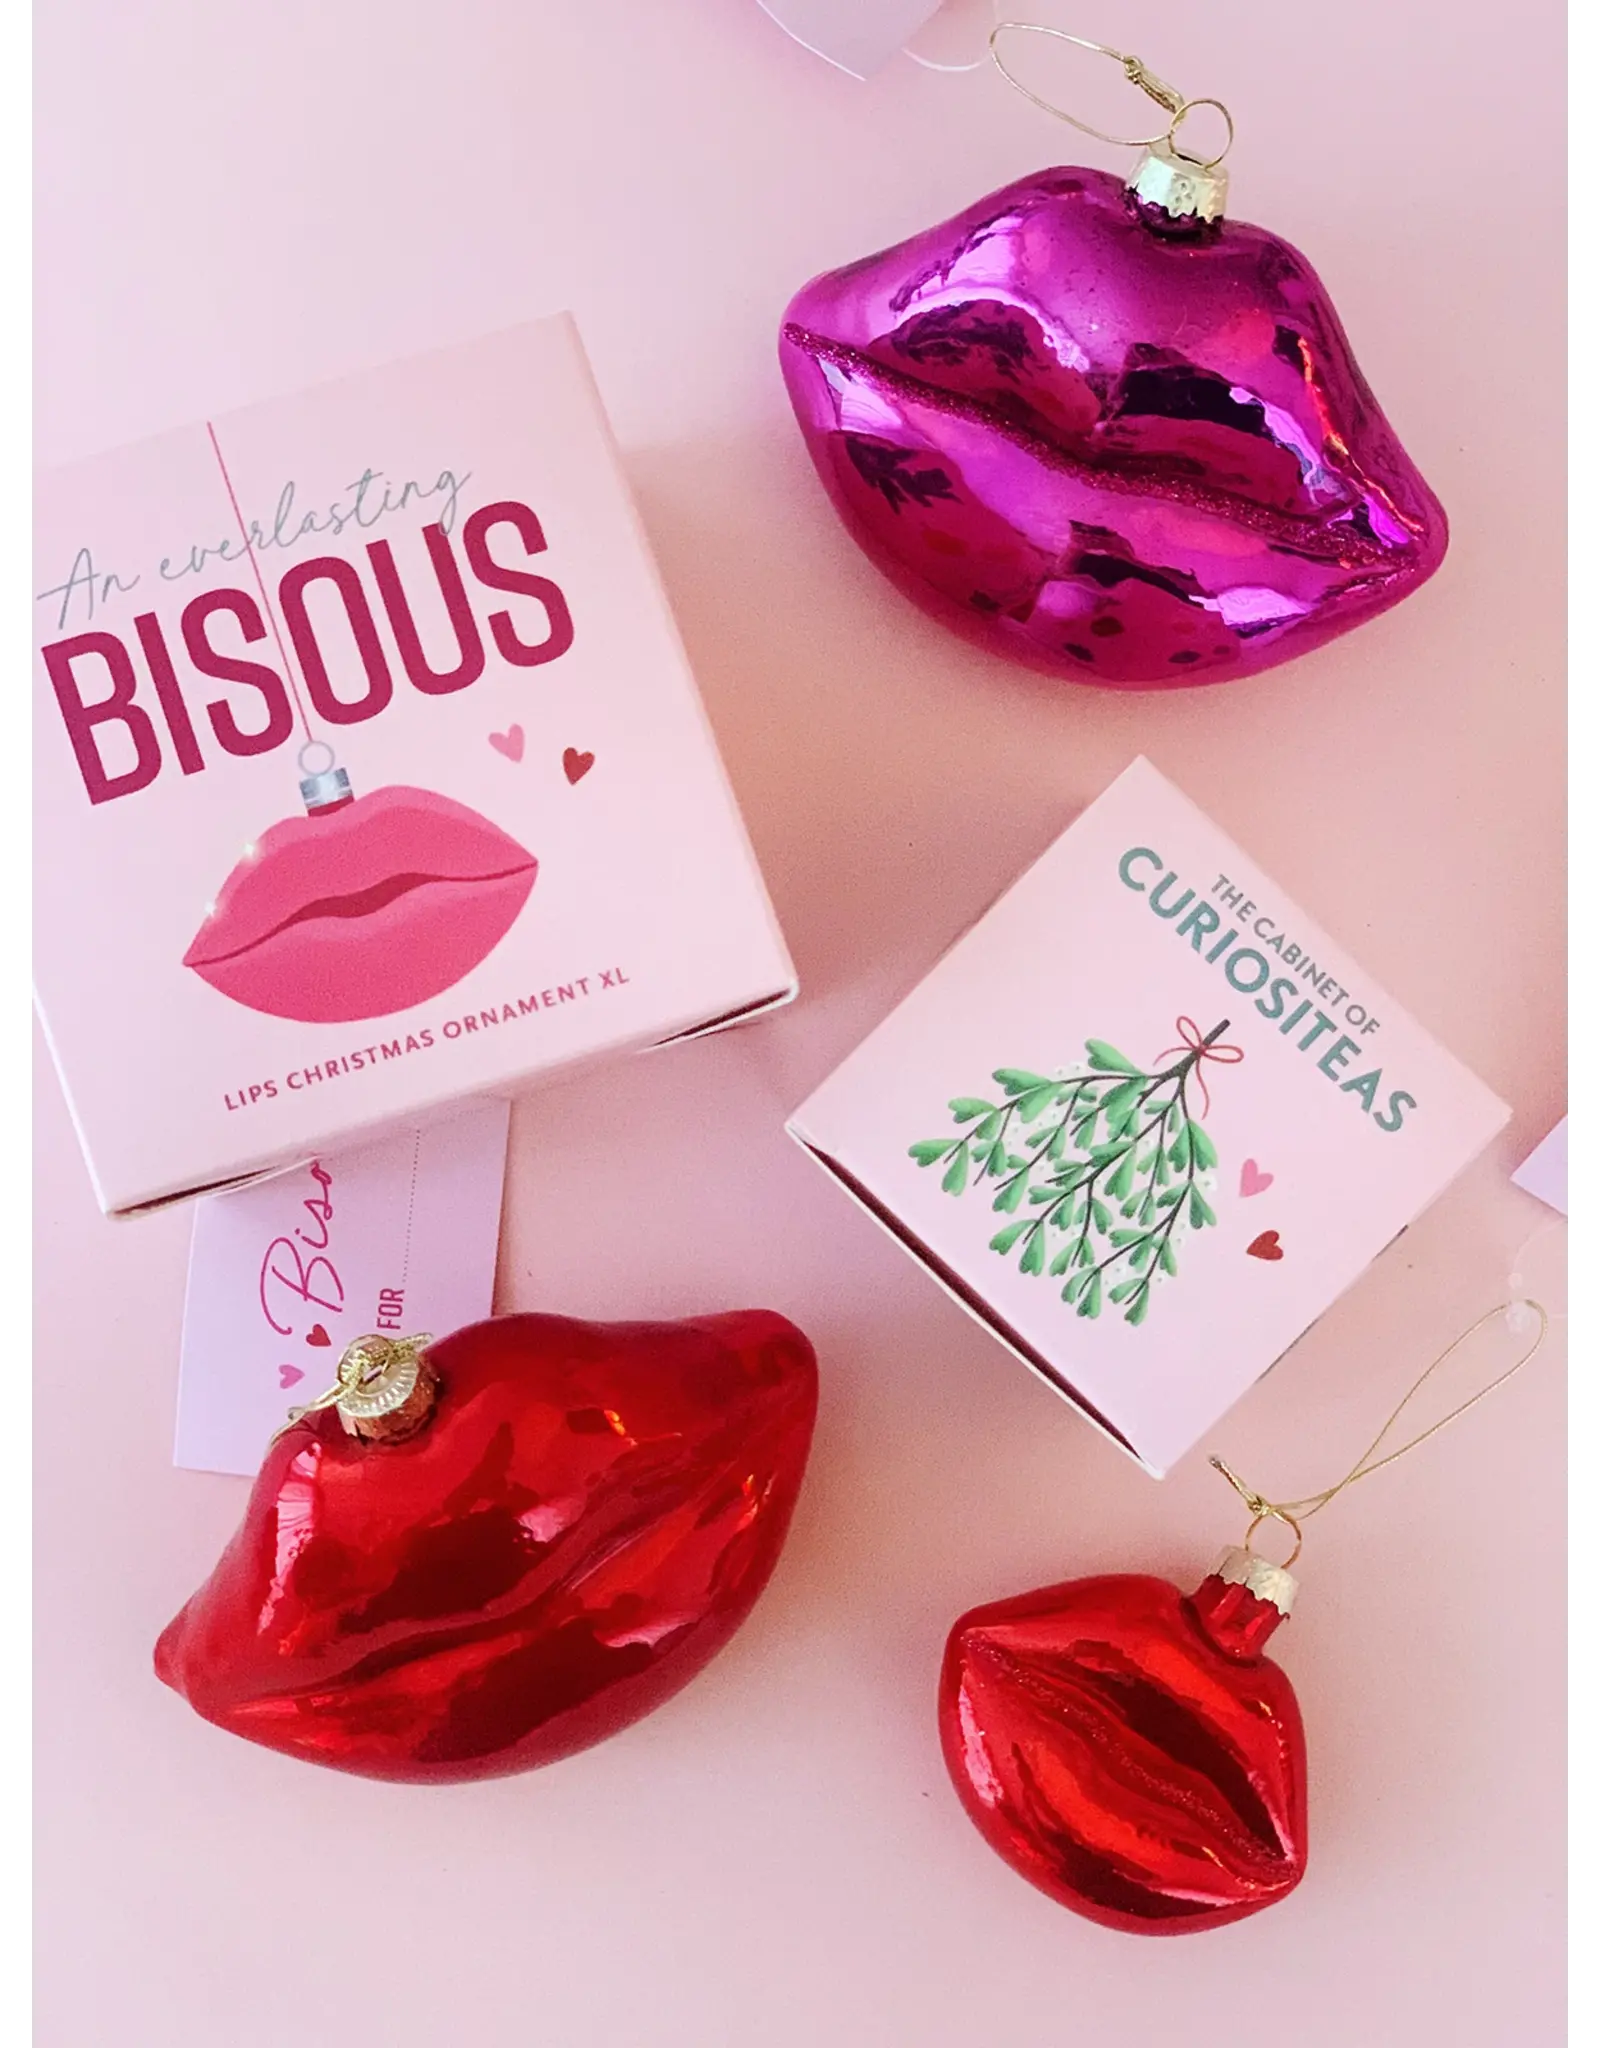 Bisous Lips Christmas Ornament M